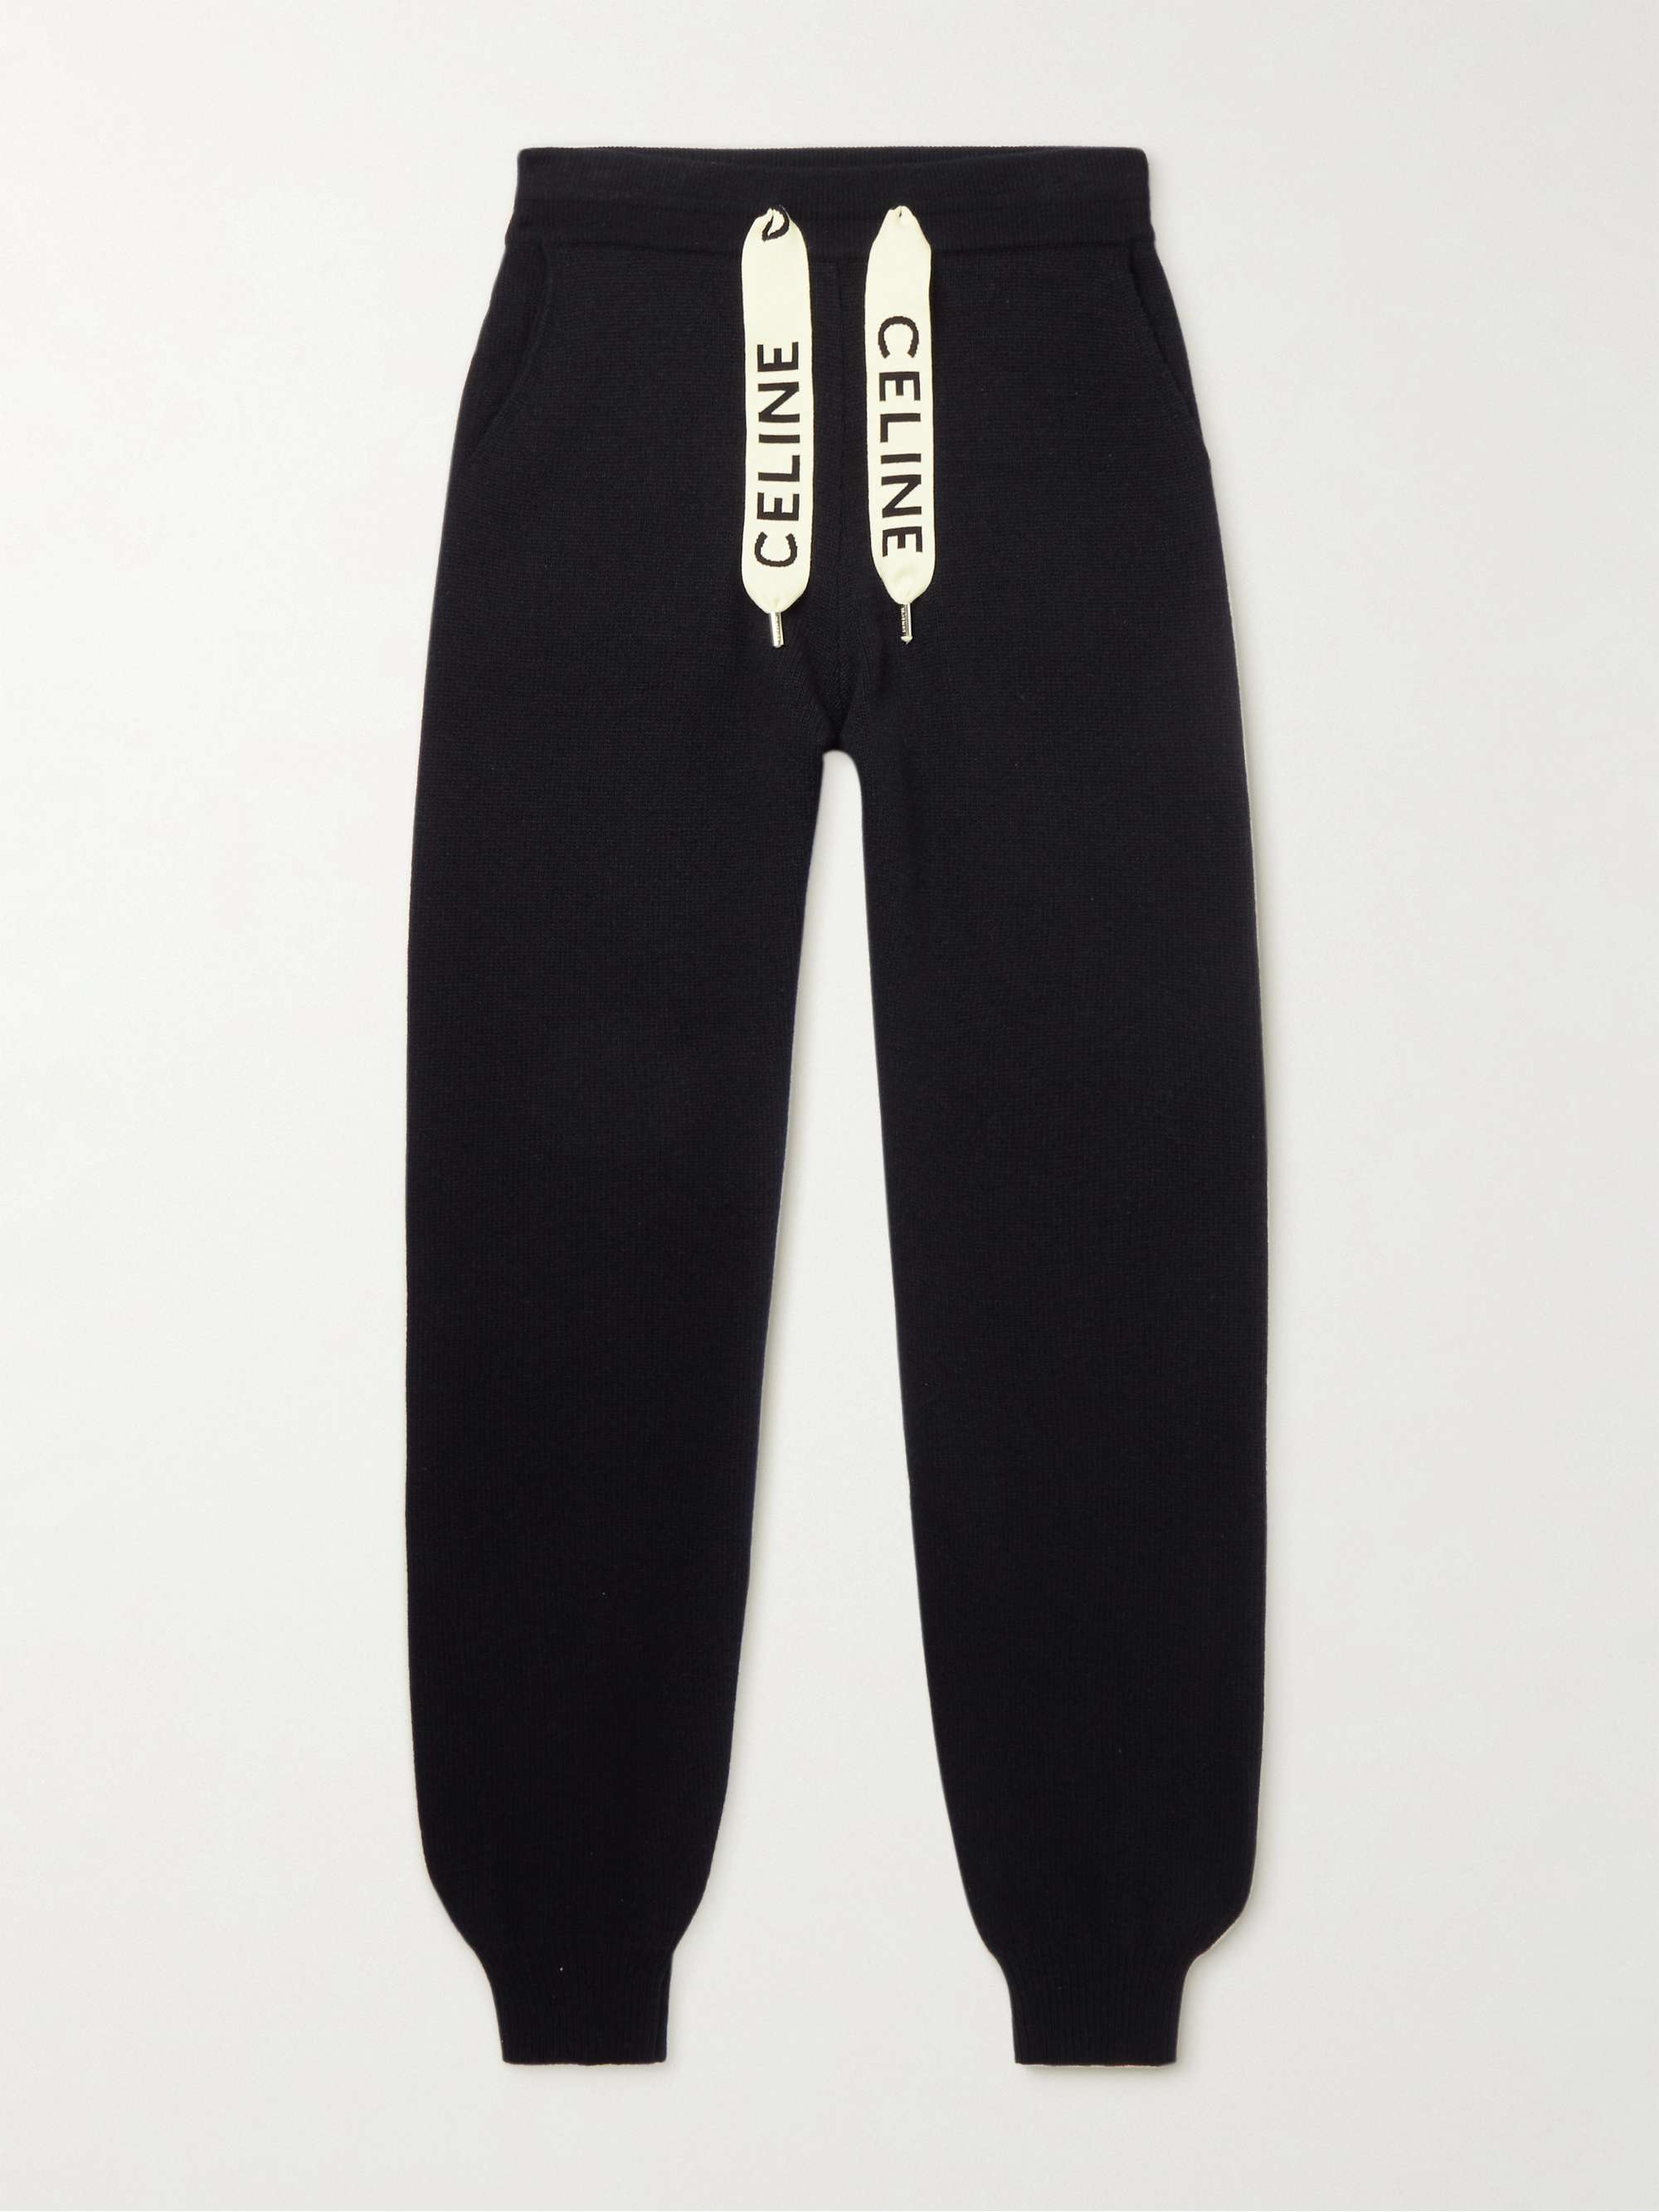 CELINE Tapered Wool and Cashmere-Blend Sweatpants